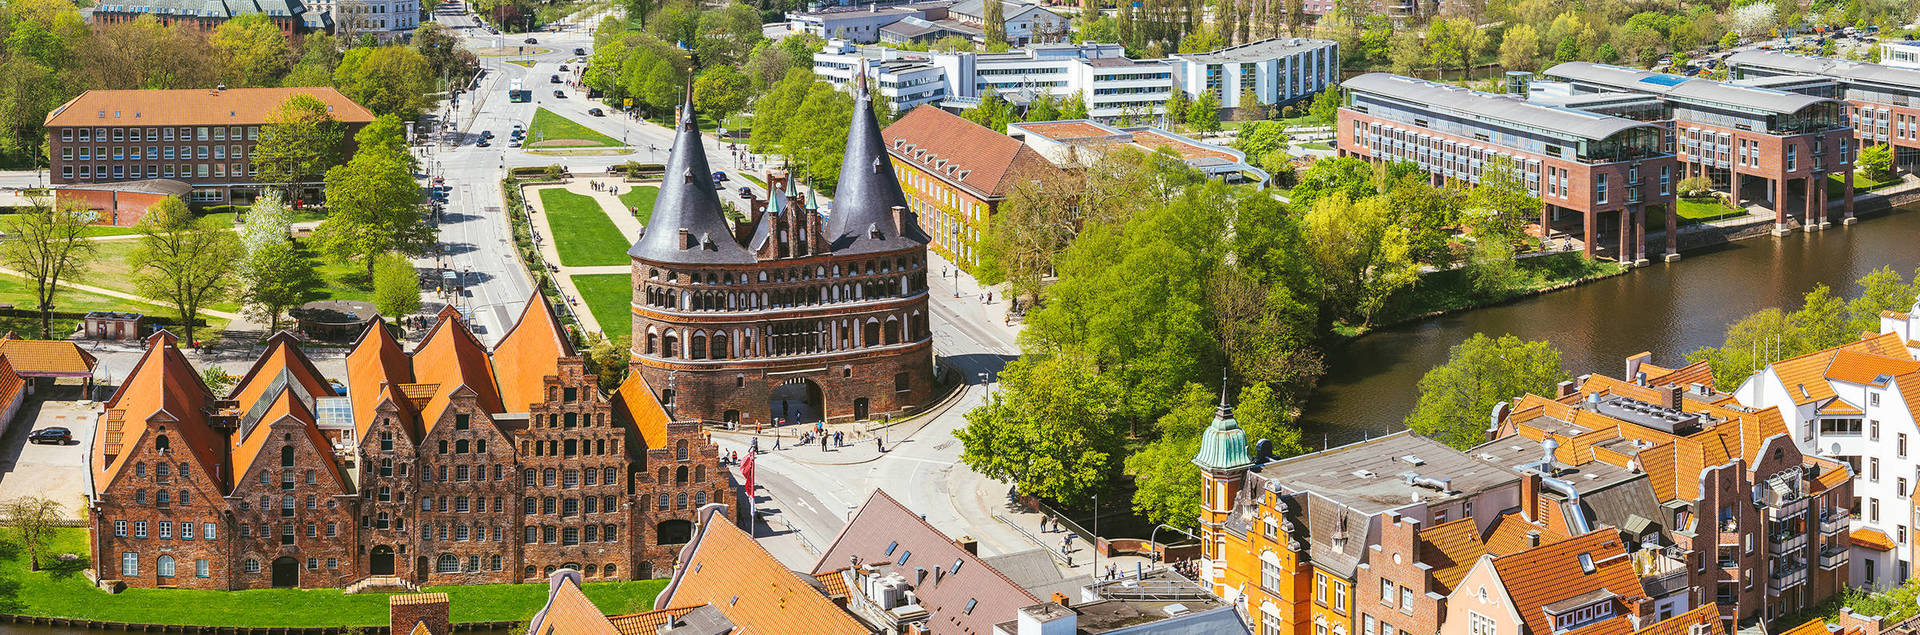 In the heart of the Hanseatic city - H+ Hotel Lübeck - Official website